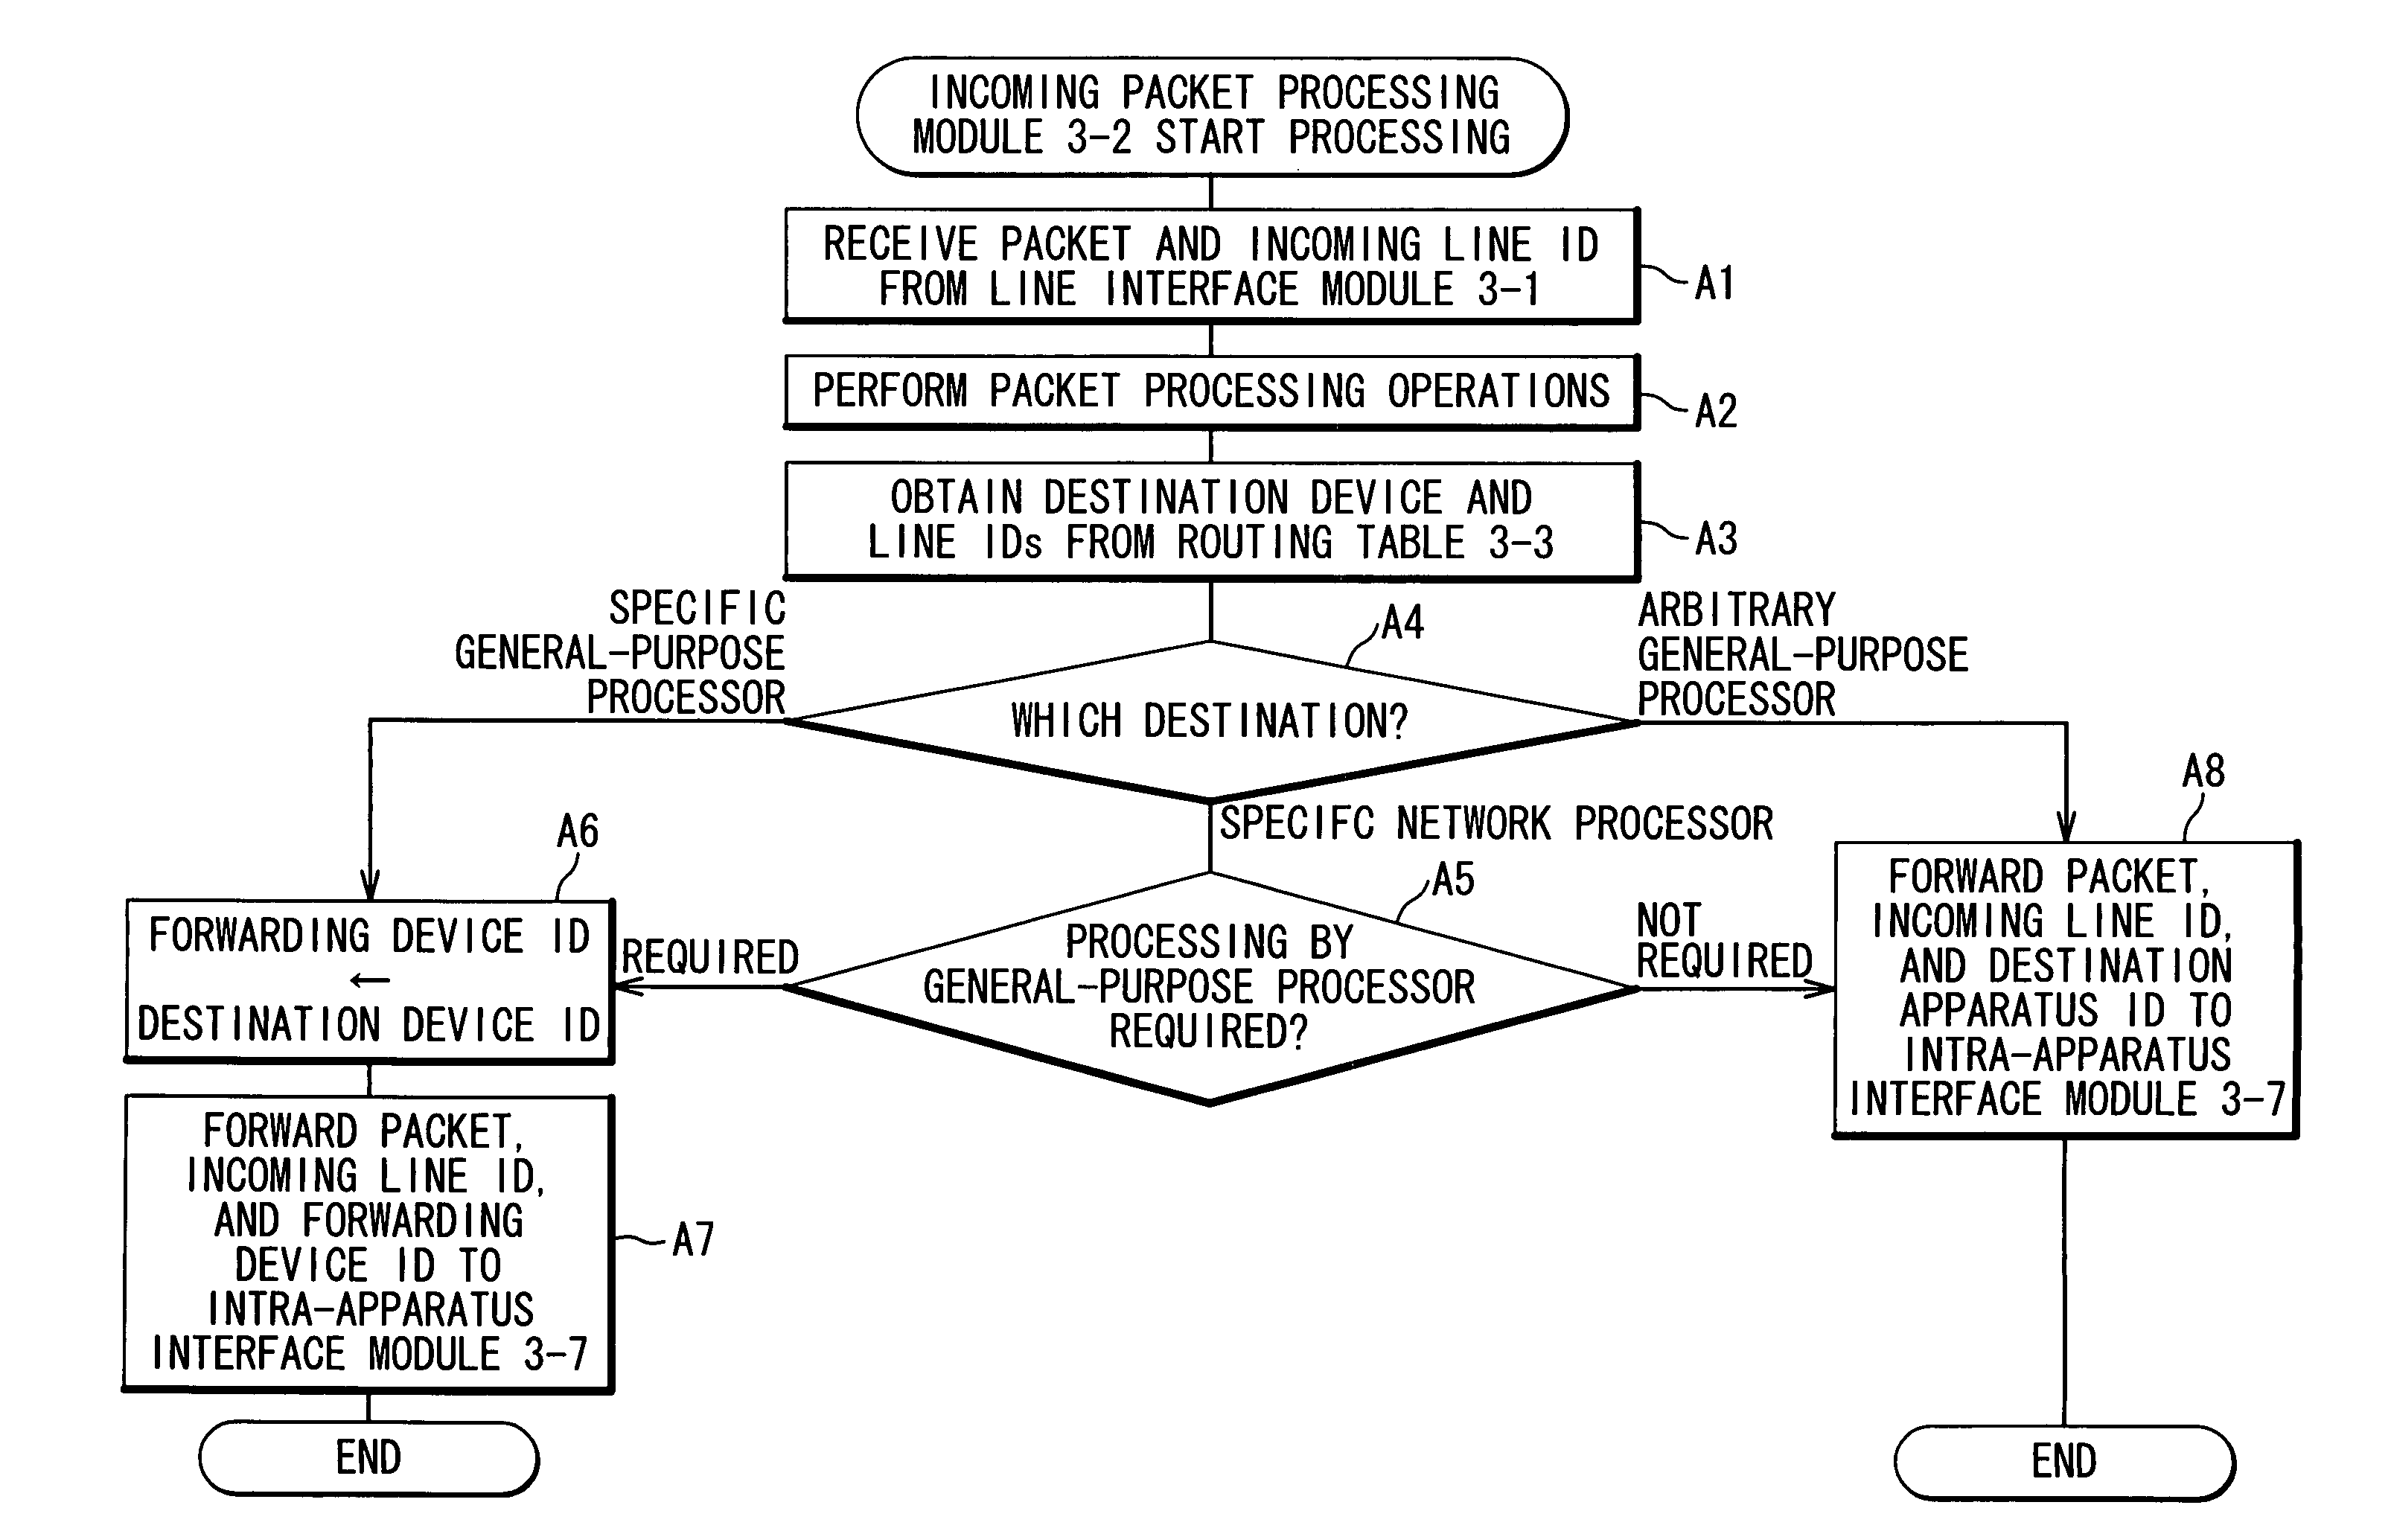 Packet transfer apparatus with multiple general-purpose processors